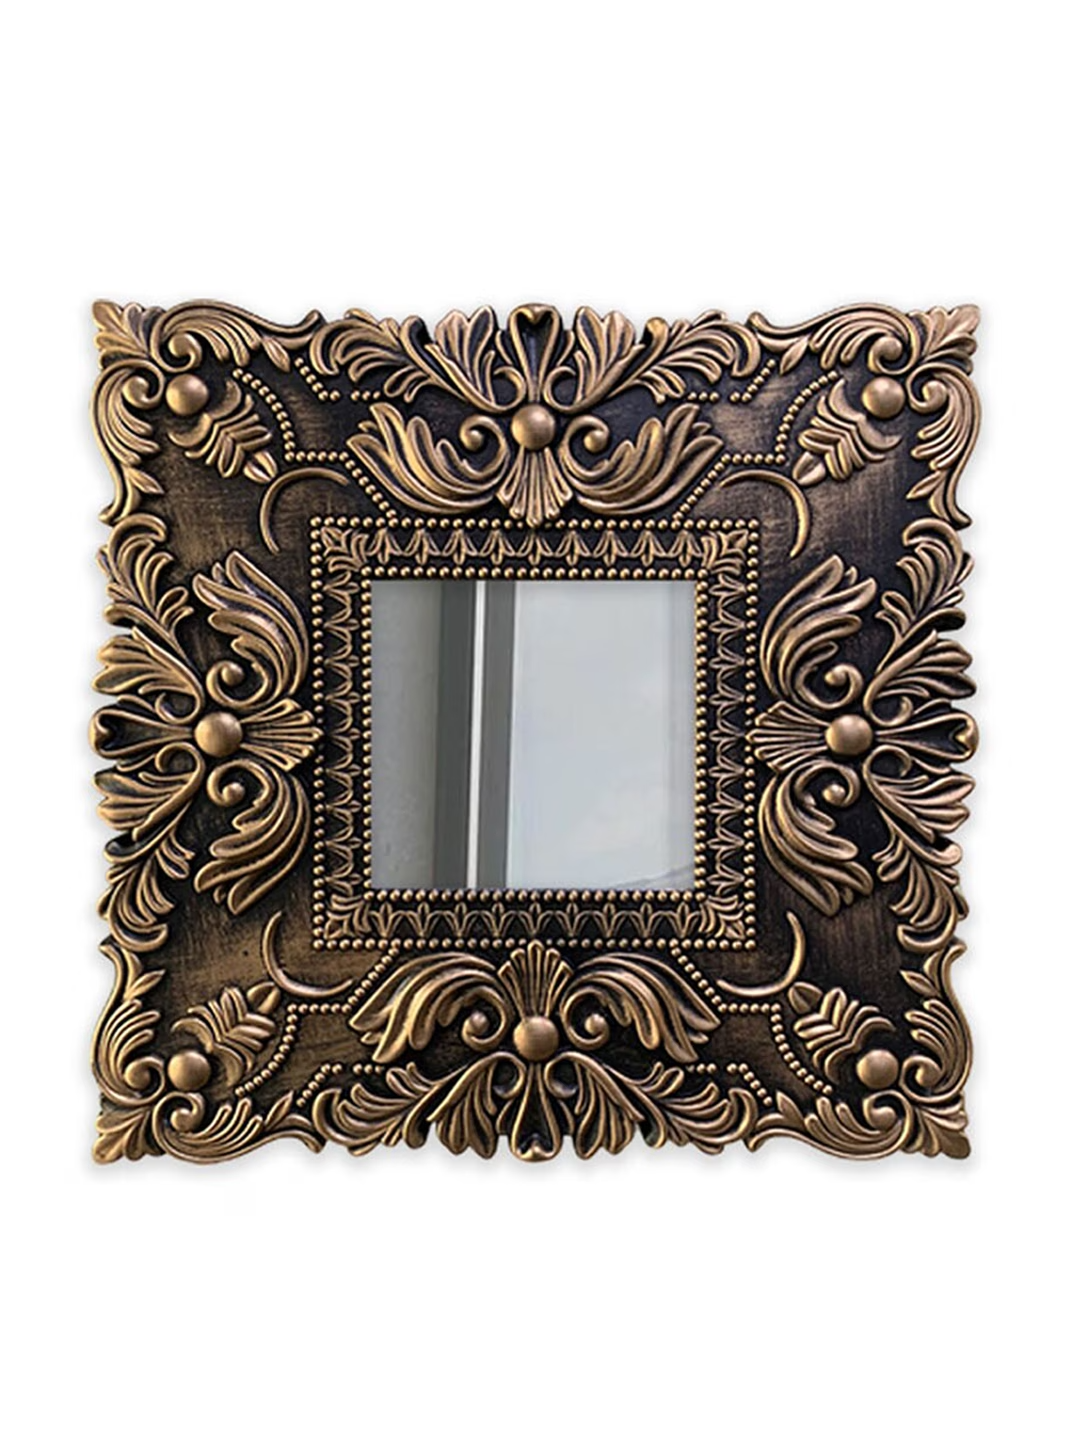 3 Pieces Brown Square Framed Decorative Mirror Wall Hangings